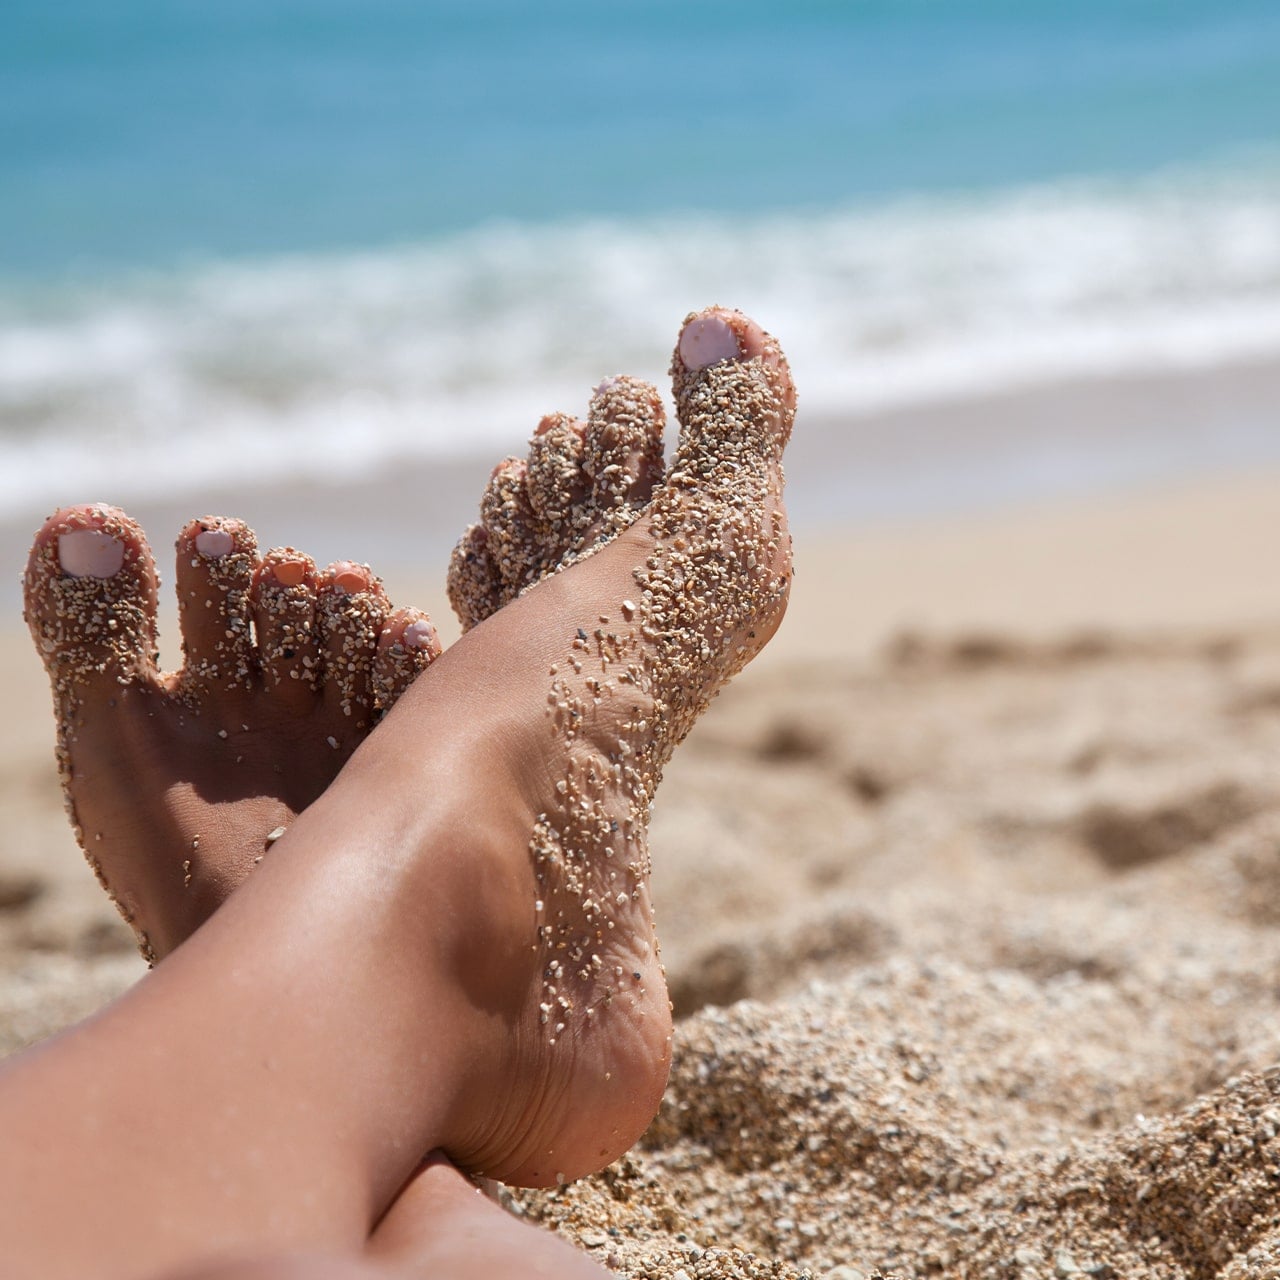 Our Must Have Foot Care Products for Summer